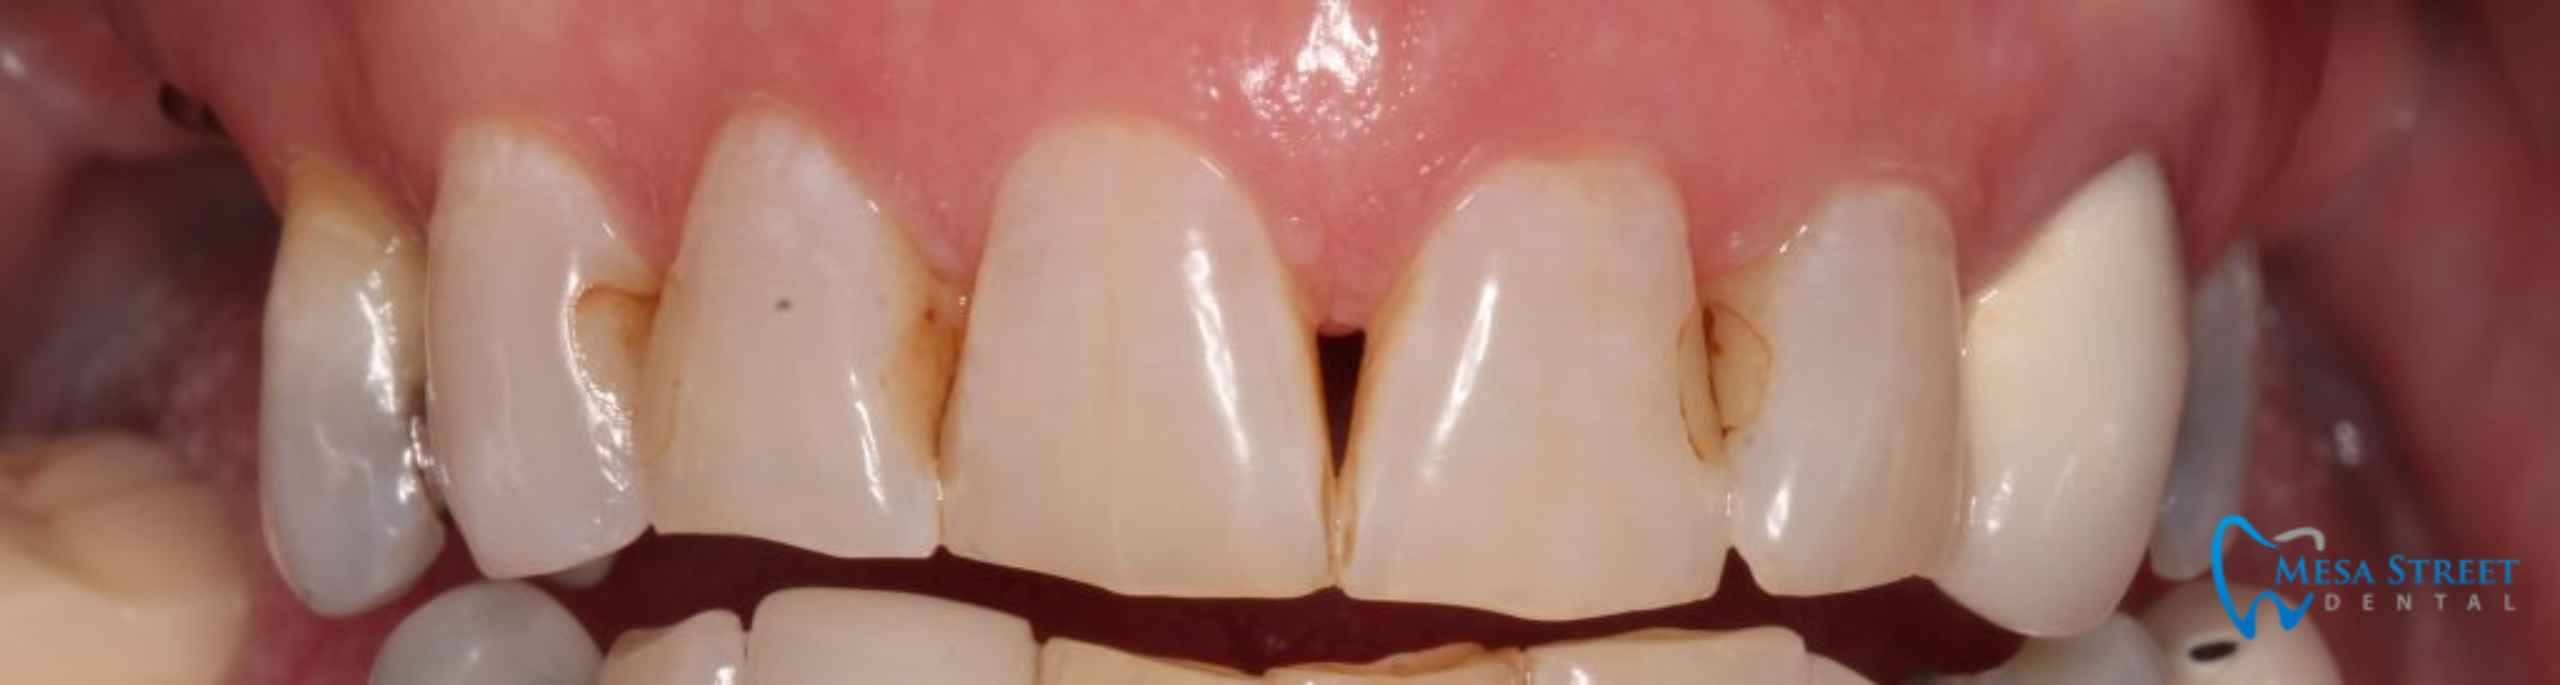 Teeth Before Crowns and Implants